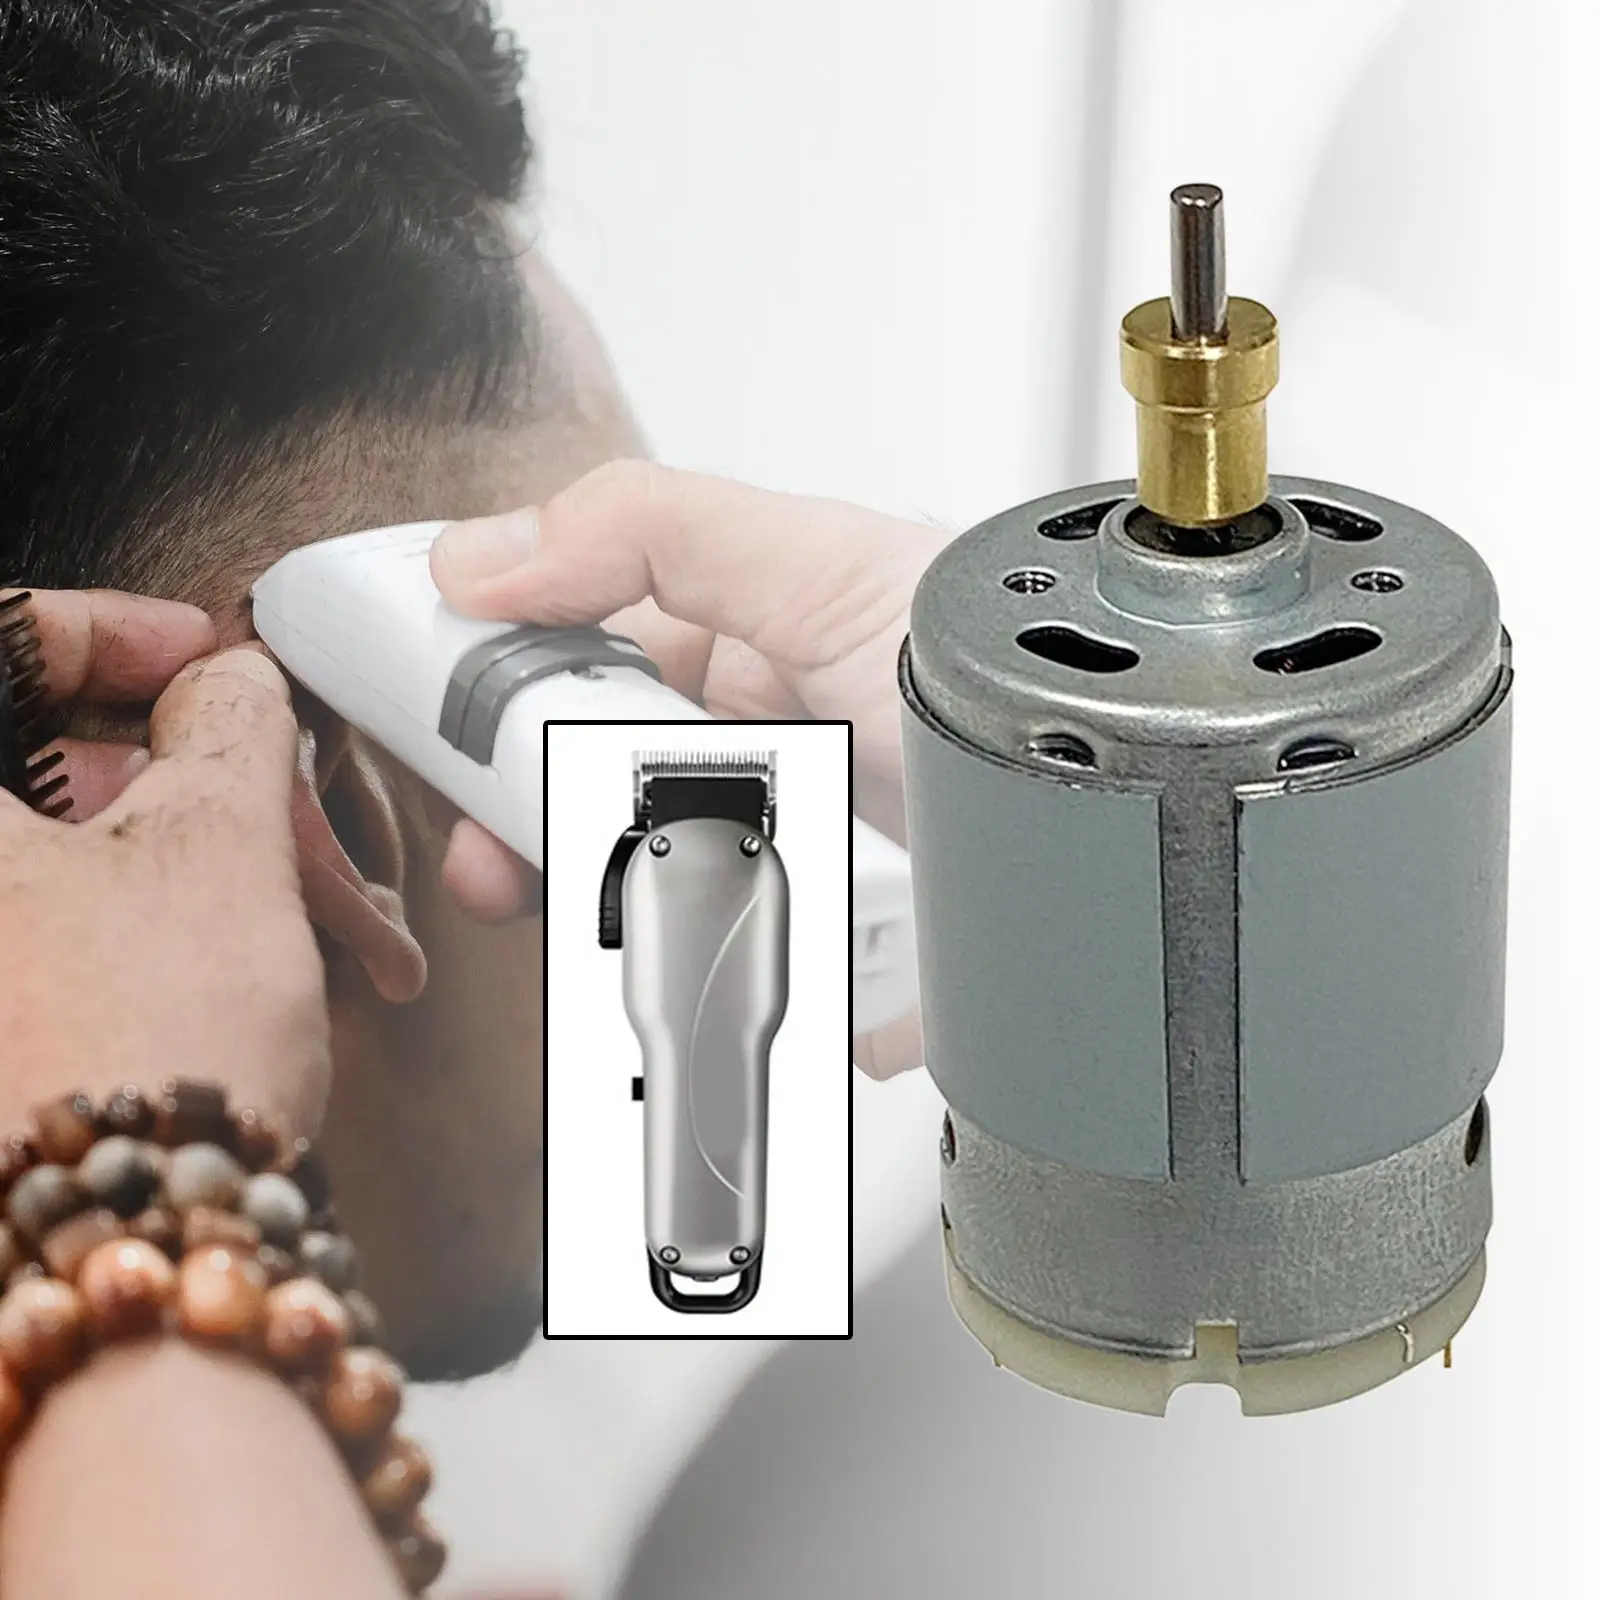 Hair Clipper Rotary Motor Pusher Engine Motor DIY Assembly for Andis 73010 Accessories Repair Part Upgrade Easily Install